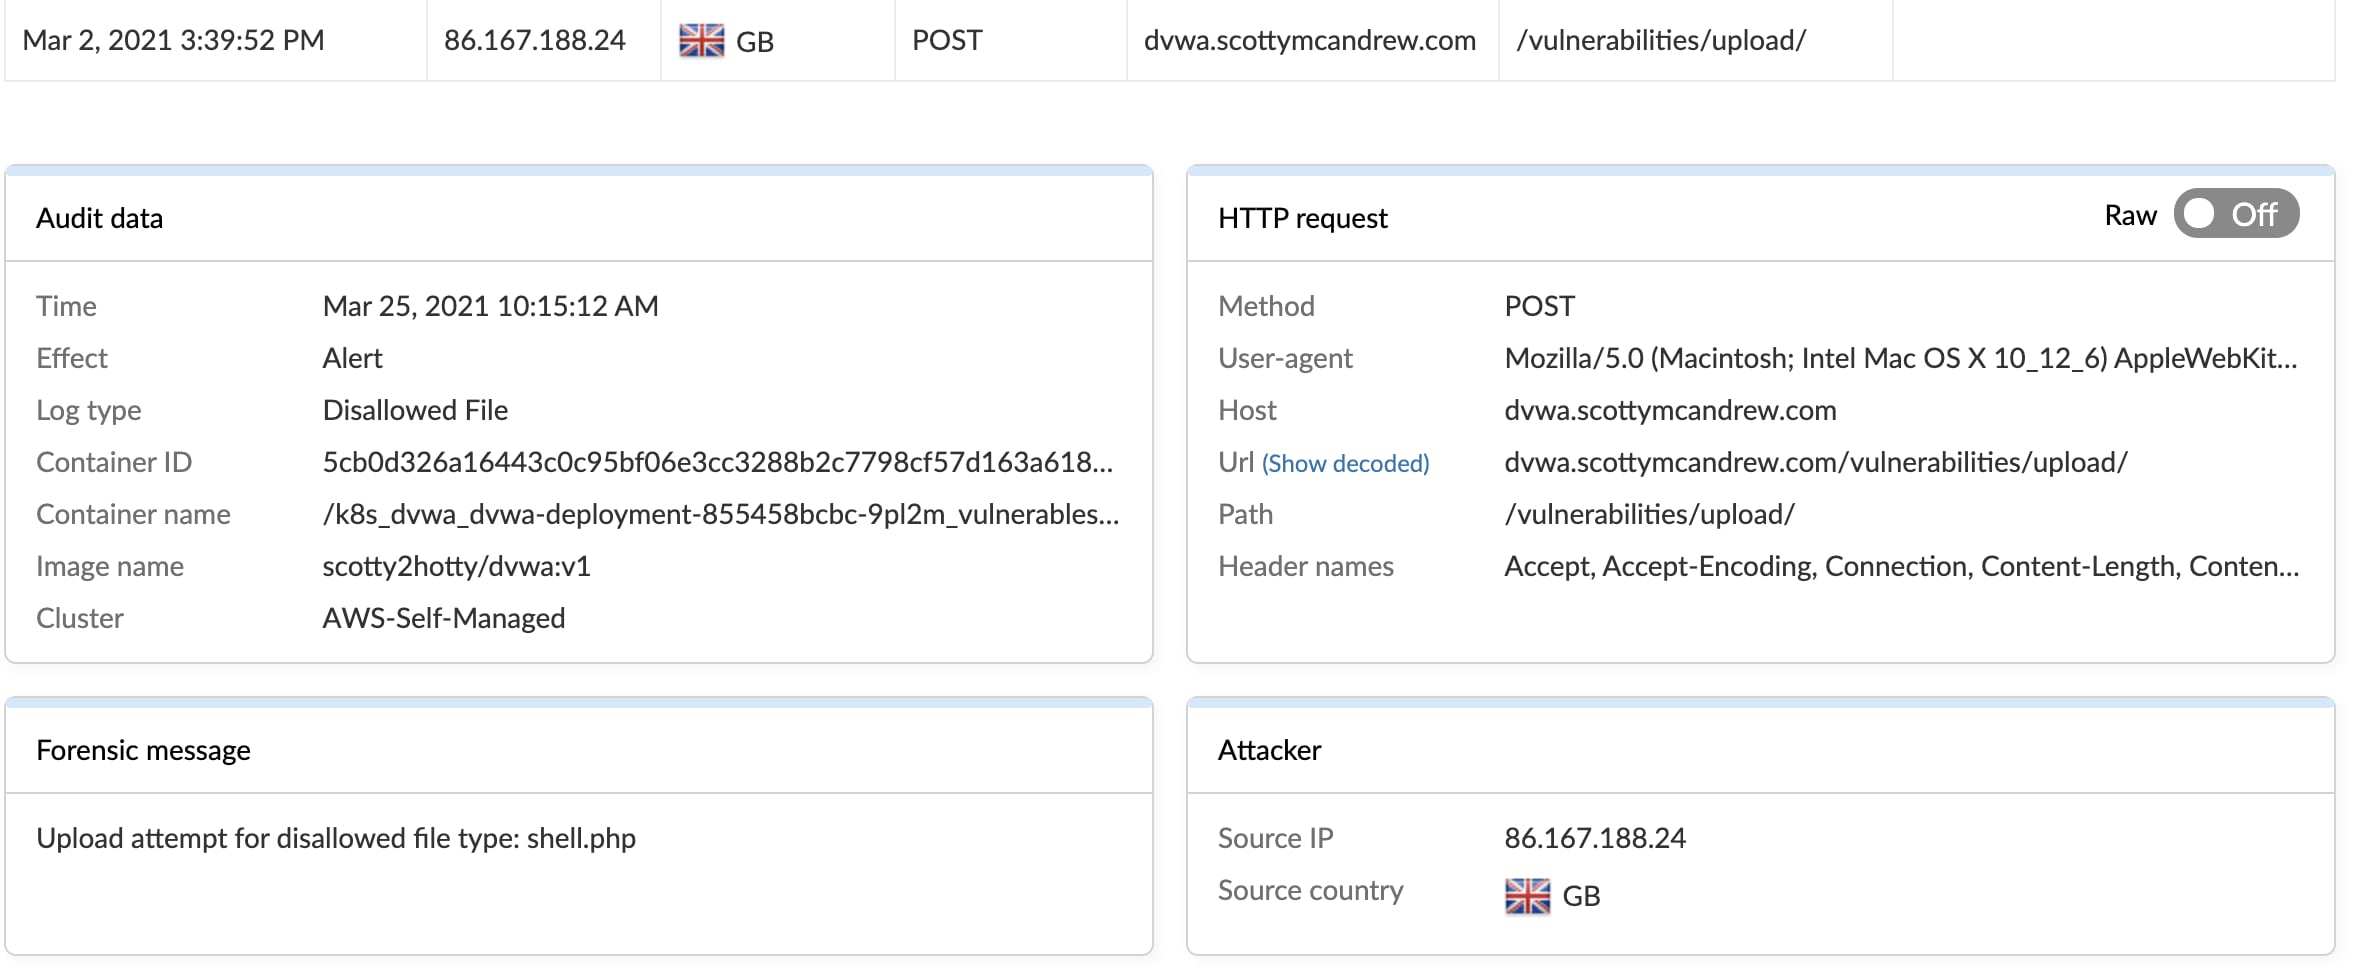 File upload protection forensics in WAAS